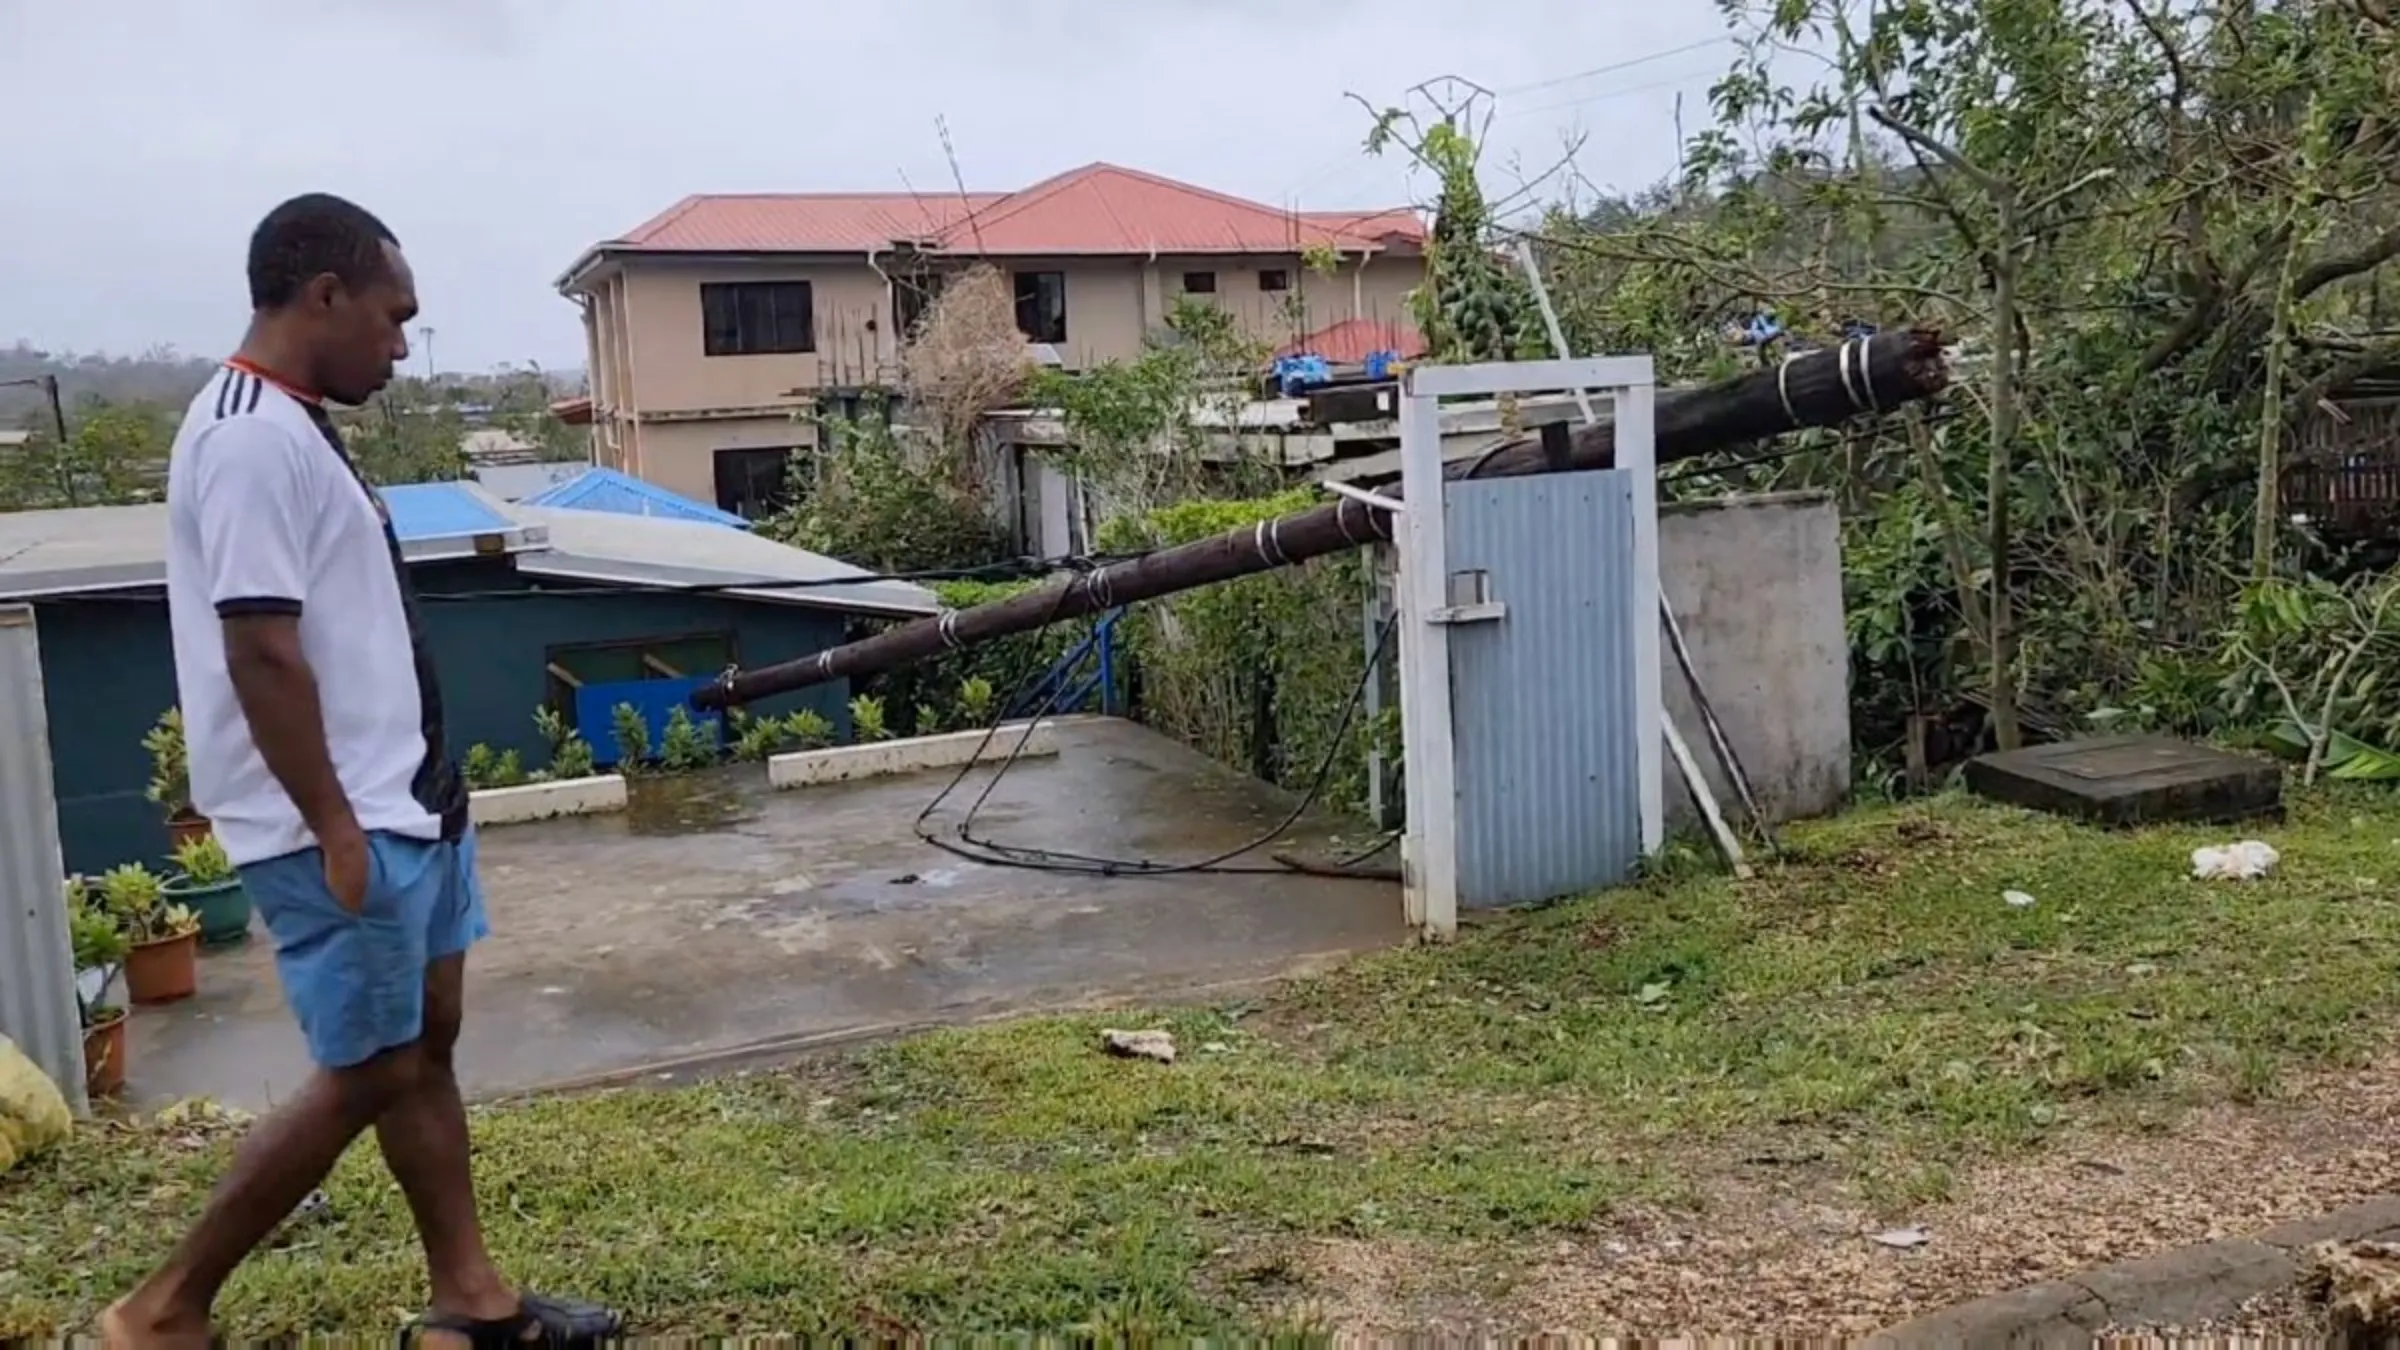 A man walks next to a fallen pole in the aftermath of cyclone Kevin, in Port Vila, Vanuatu March 4, 2023, in this screen grab obtained from a social media video. DevMode/via REUTERS